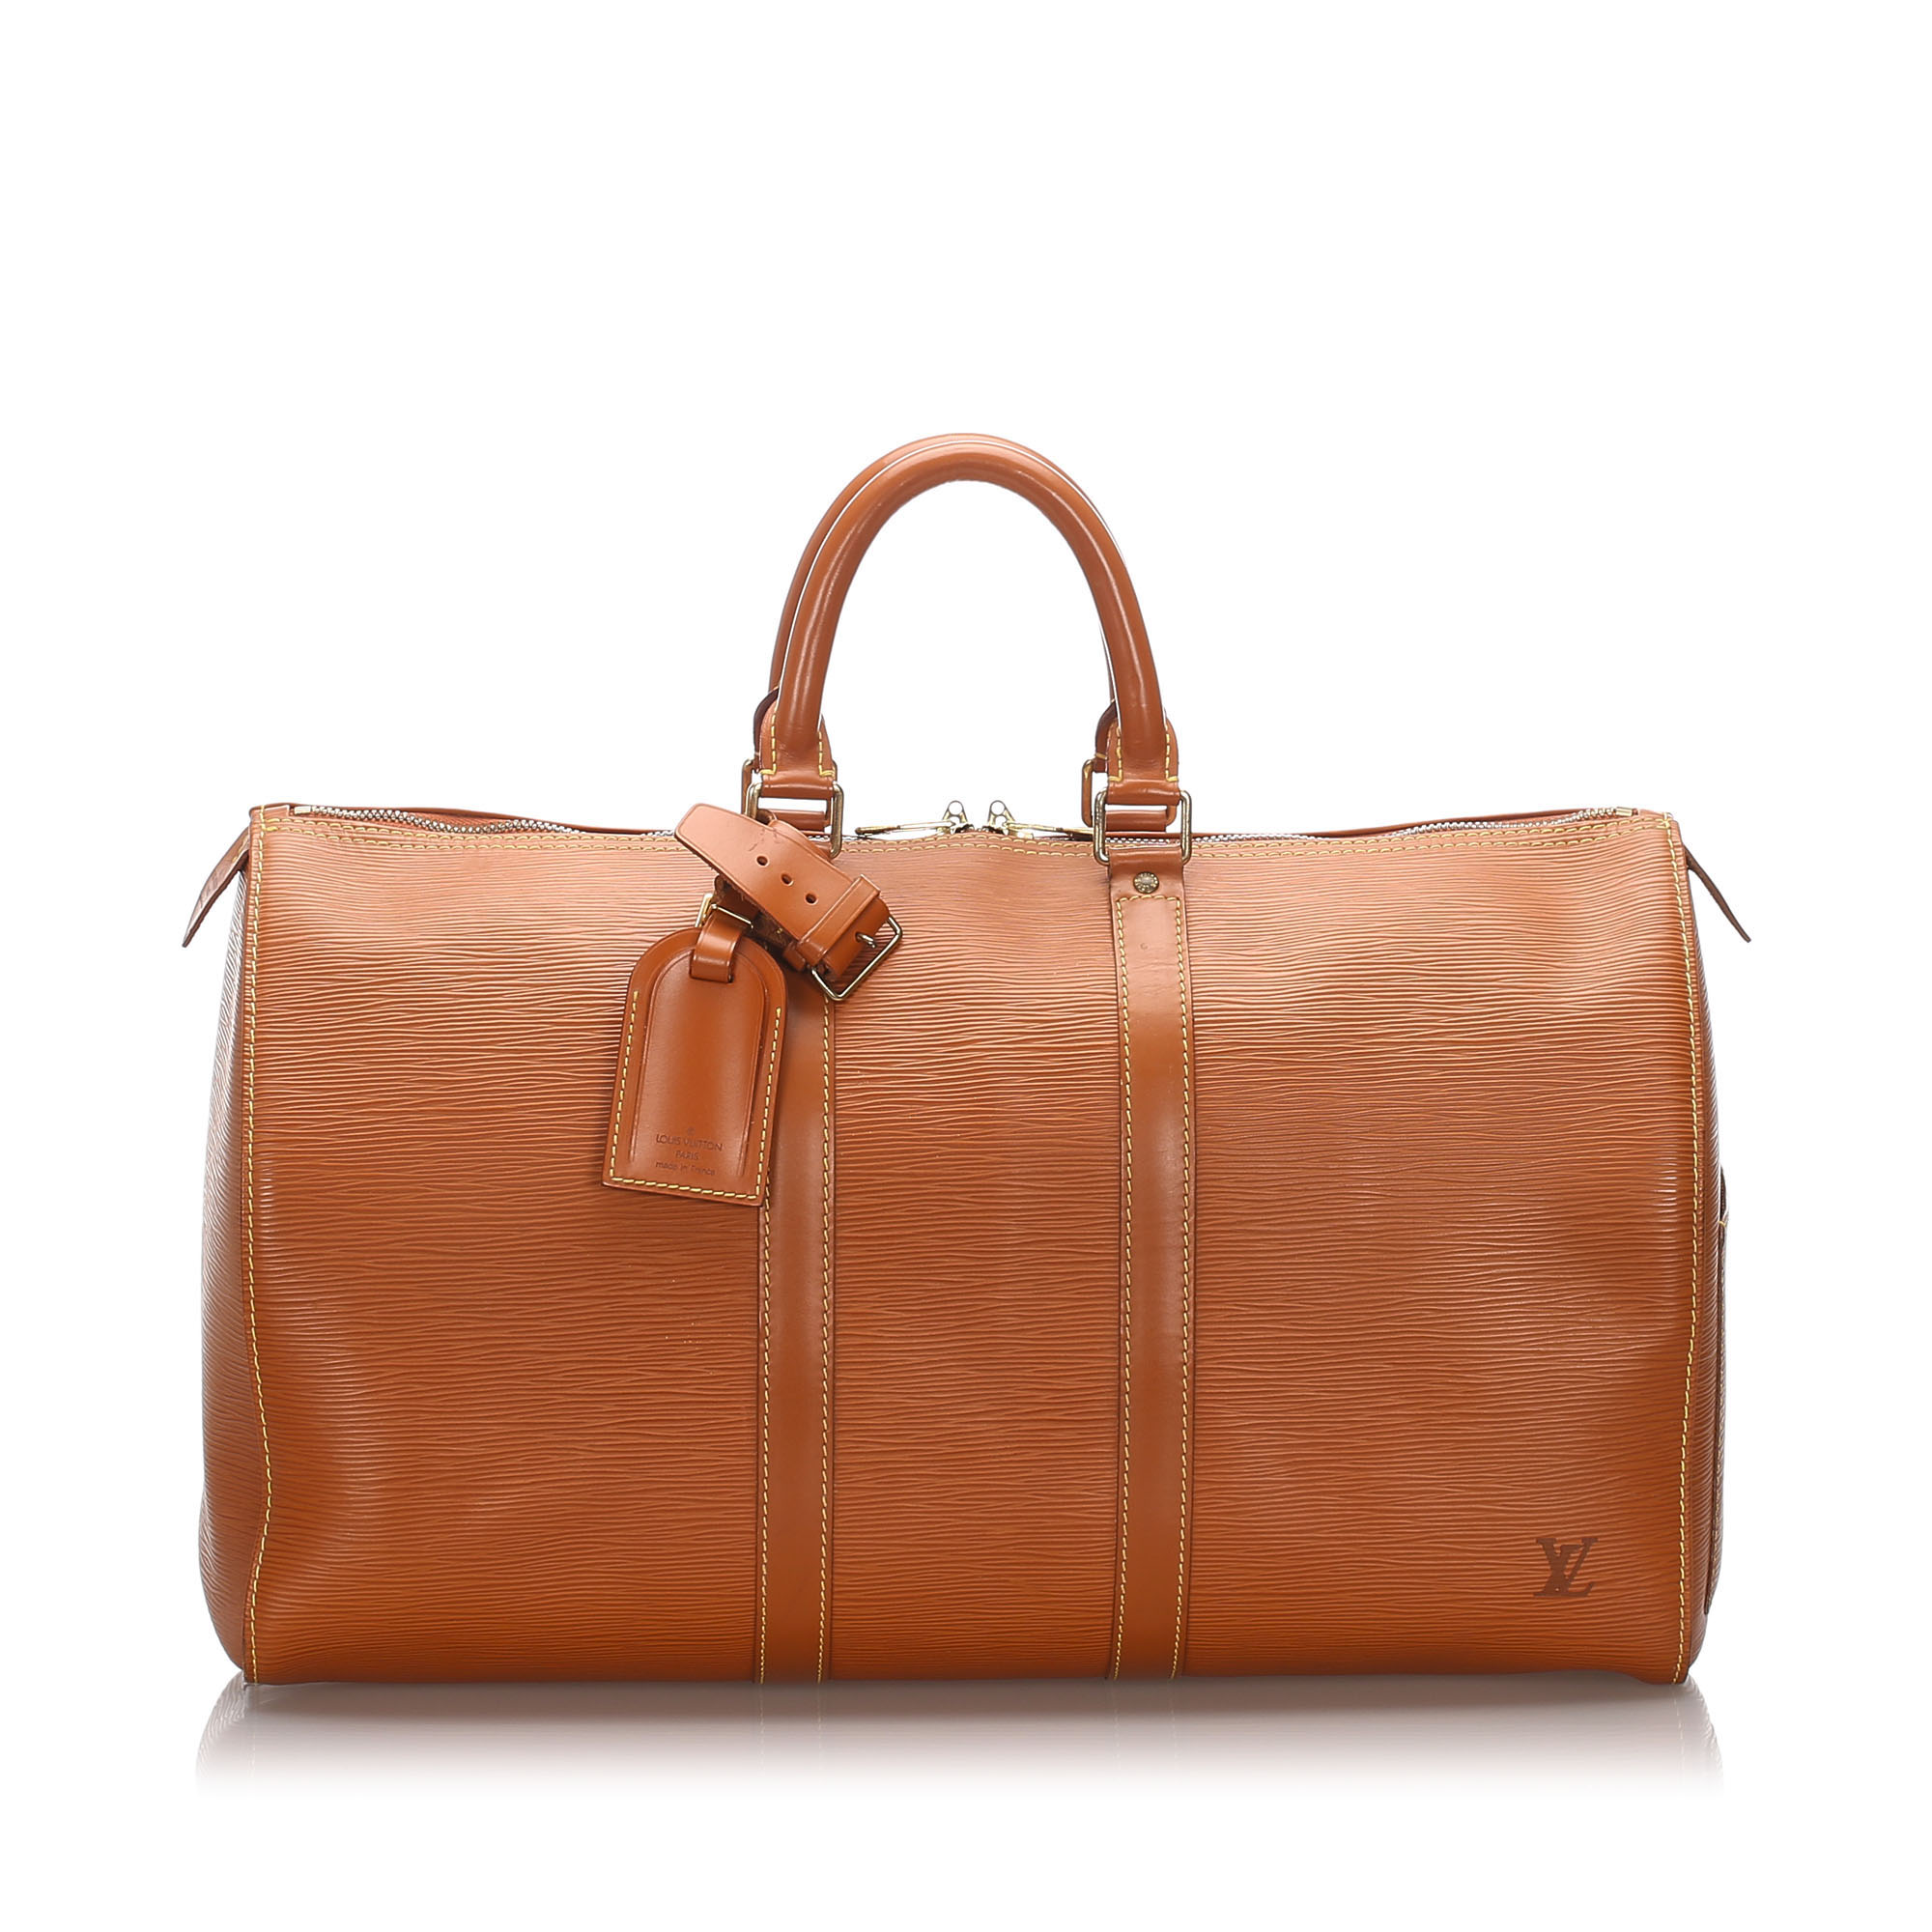 Louis Vuitton Epi Keepall 45 Travel Bag, the Keepall 45 features an epi leather body, rolled leather